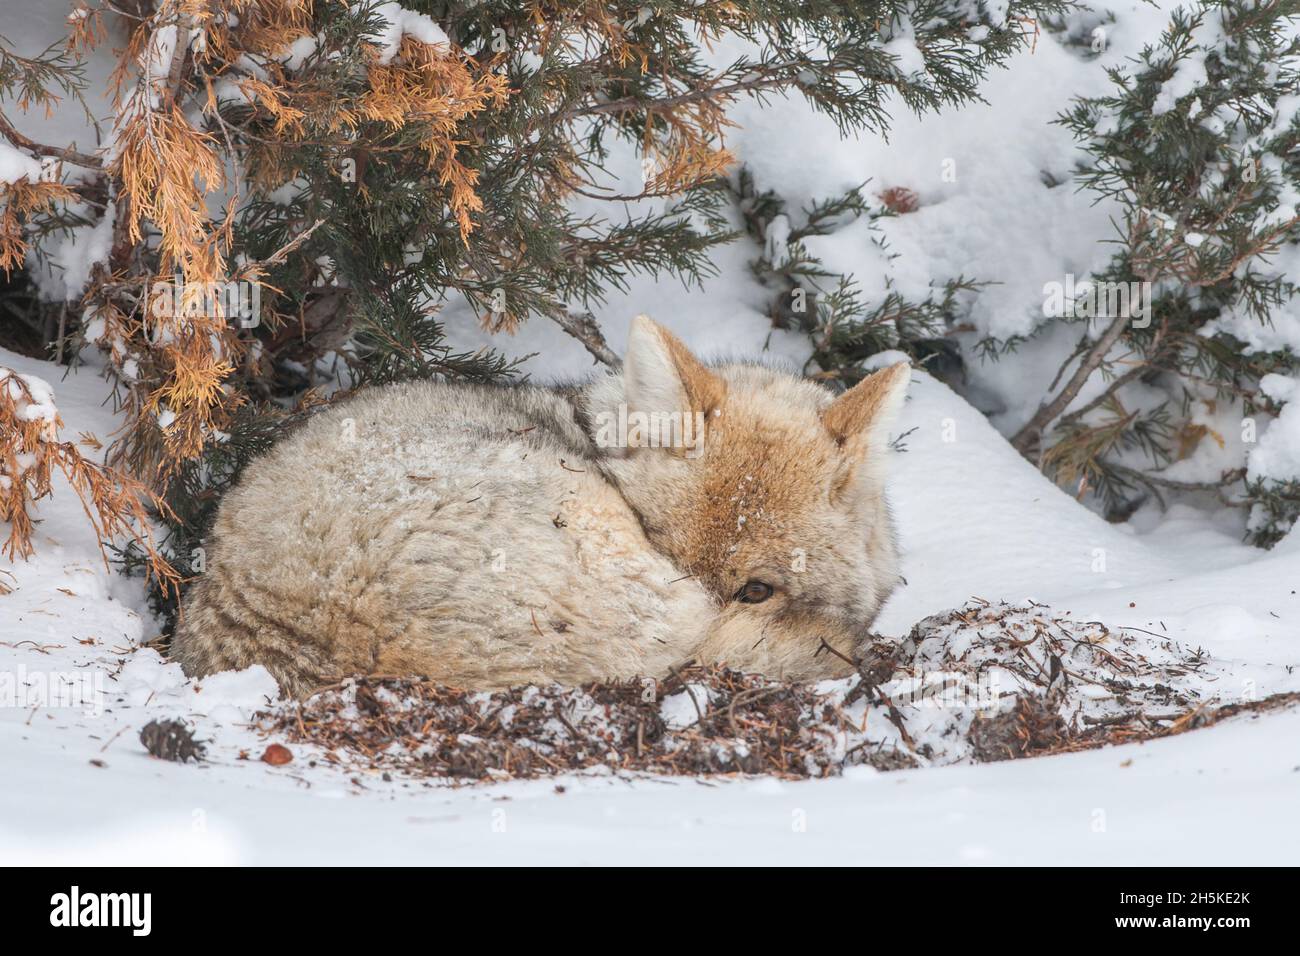 A sleepy coyote (Canis latrans) curled up in a ball under a tree in the snow, peeking at the camera Stock Photo